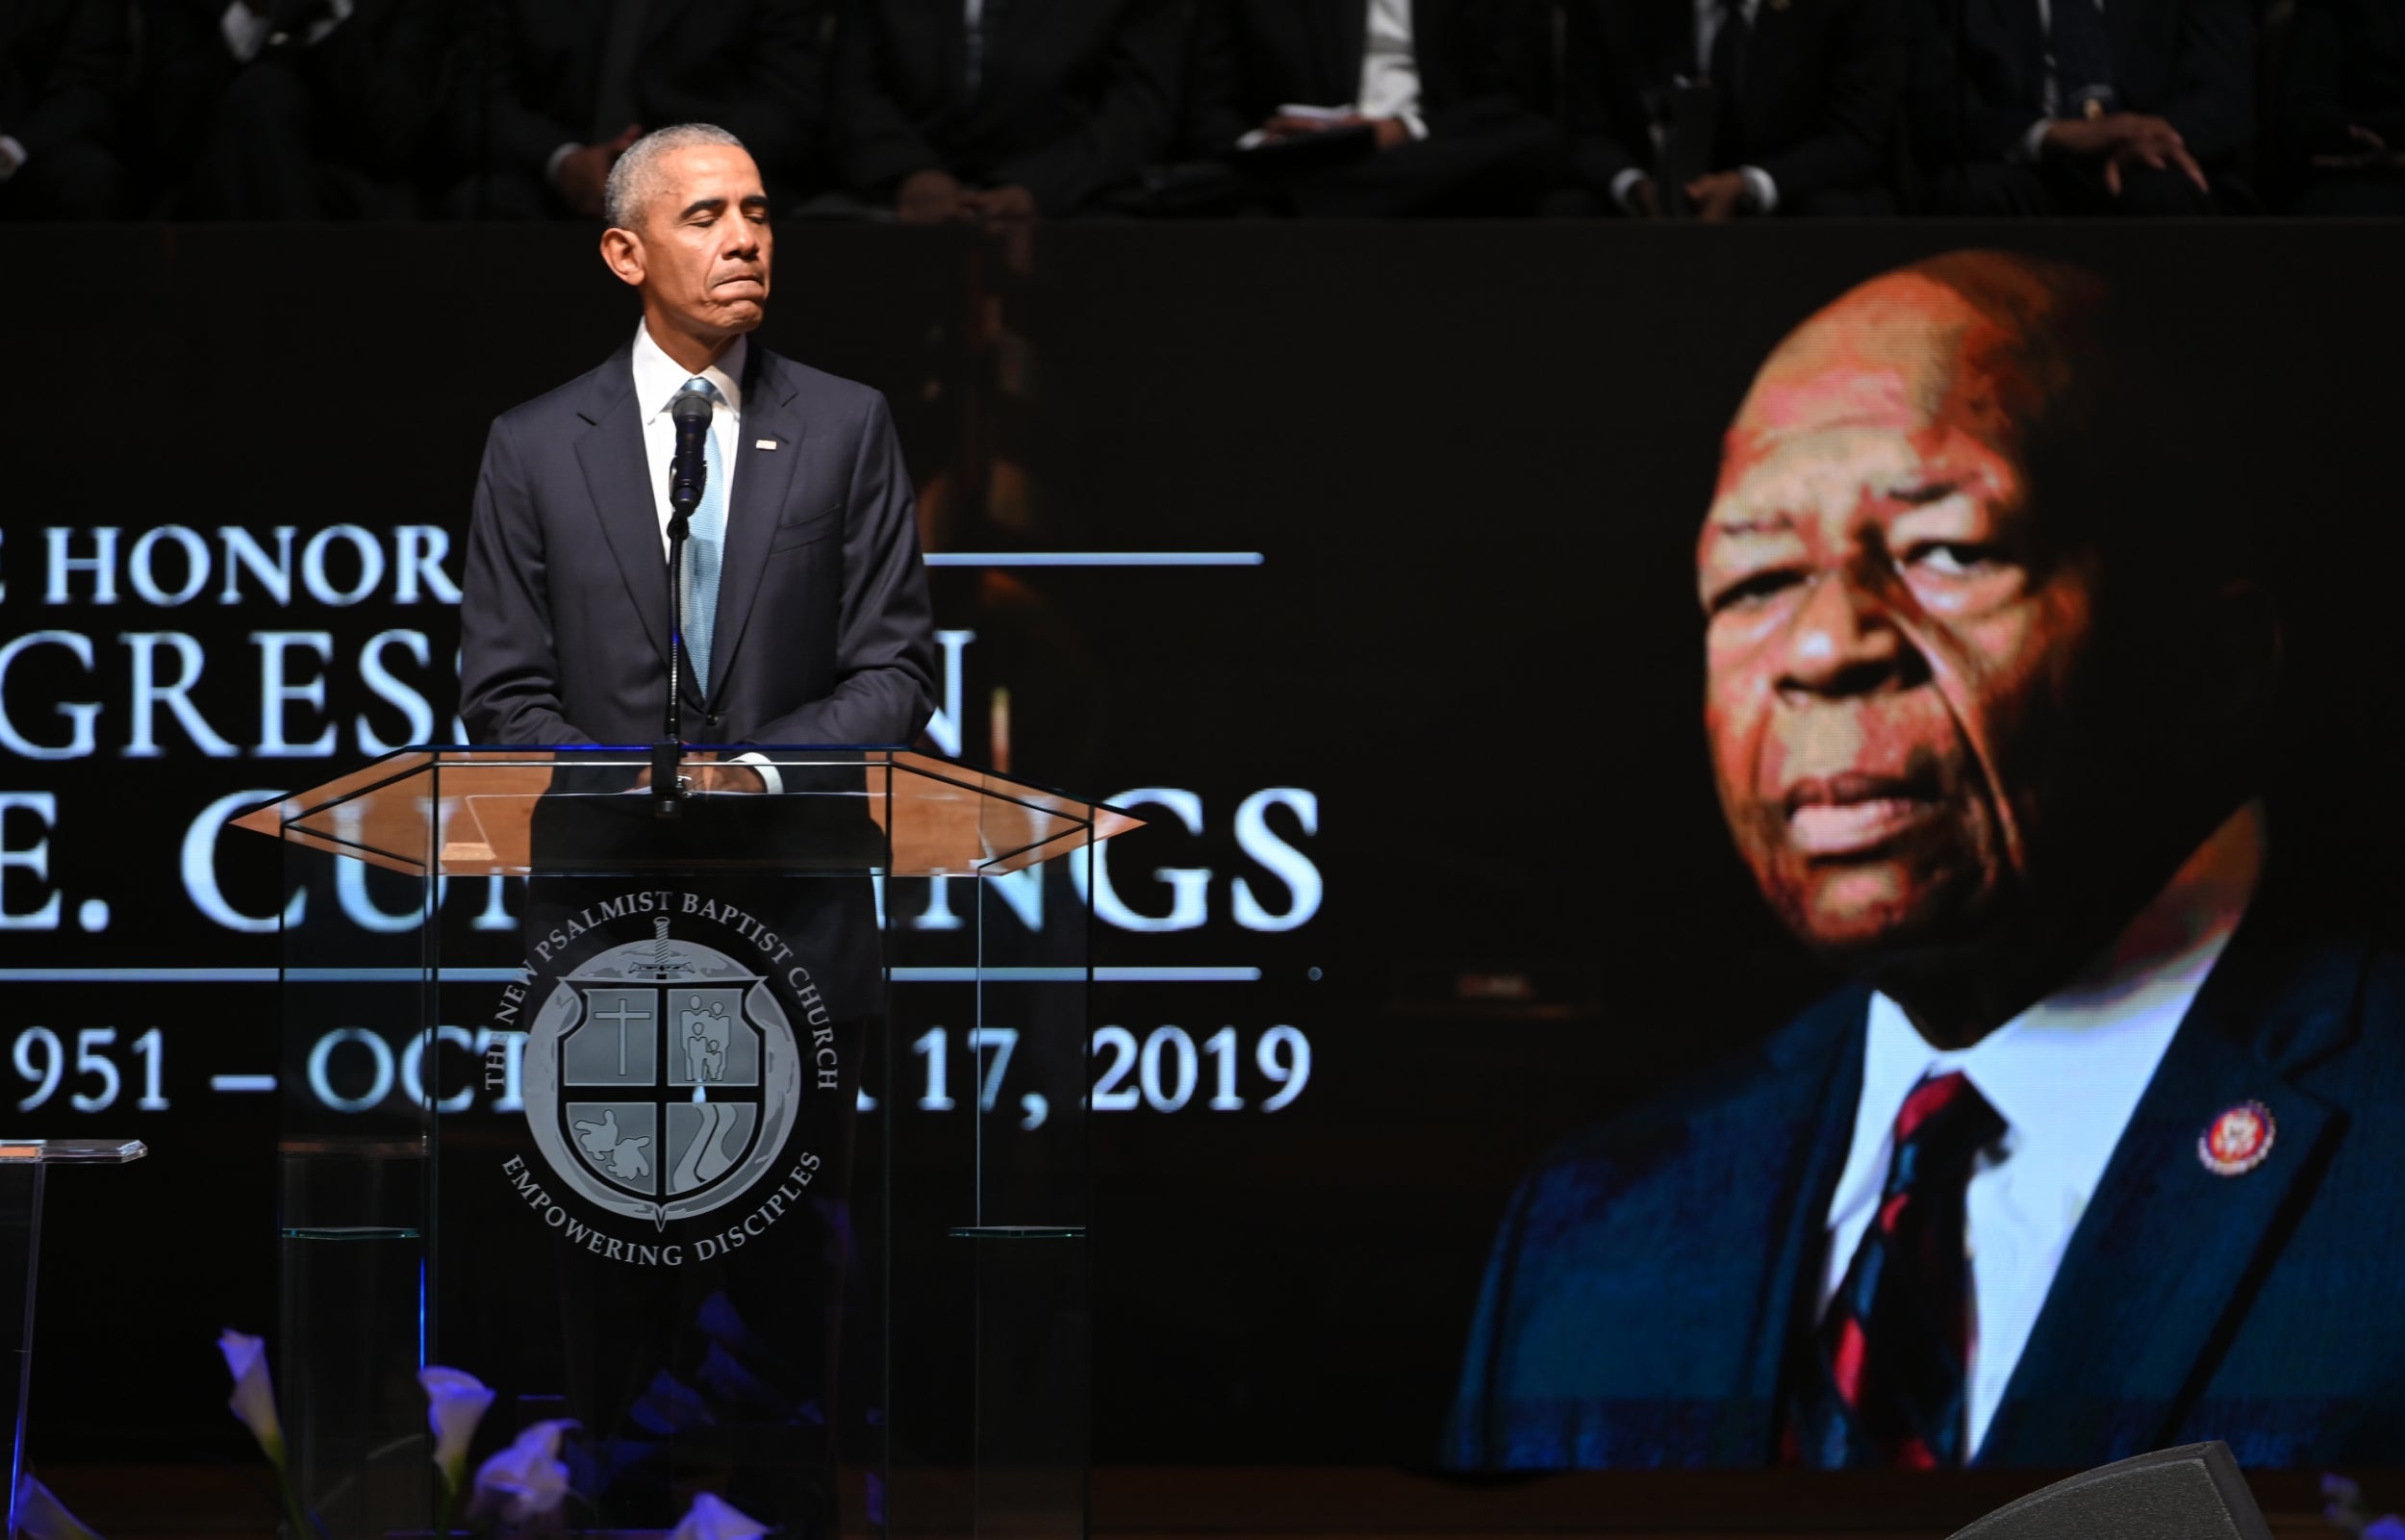 Former president Barack Obama gives a eulogy at the funeral of Elijah Cummings in Baltimore